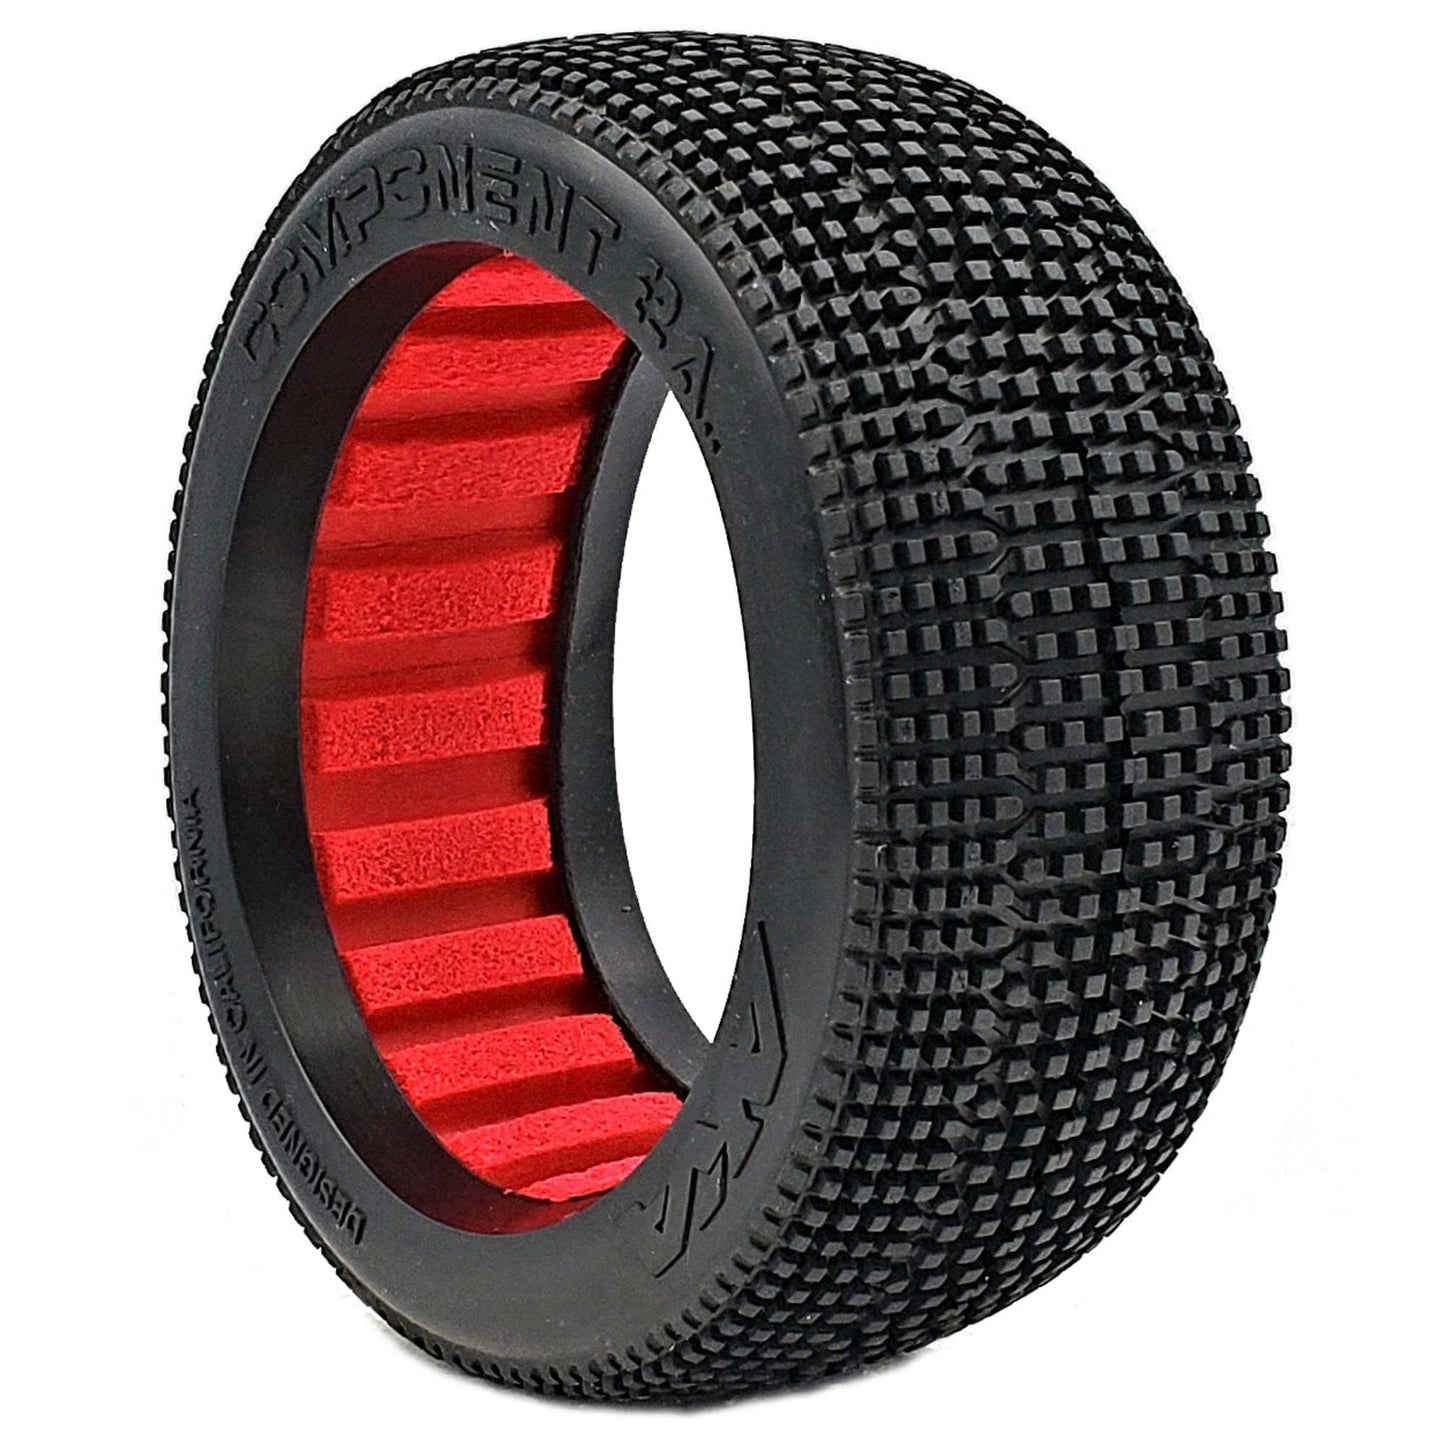 1/8 2AB Medium Long Wear Tires, Red Inserts( 2): Buggy - Dirt Cheap RC SAVING YOU MONEY, ONE PART AT A TIME